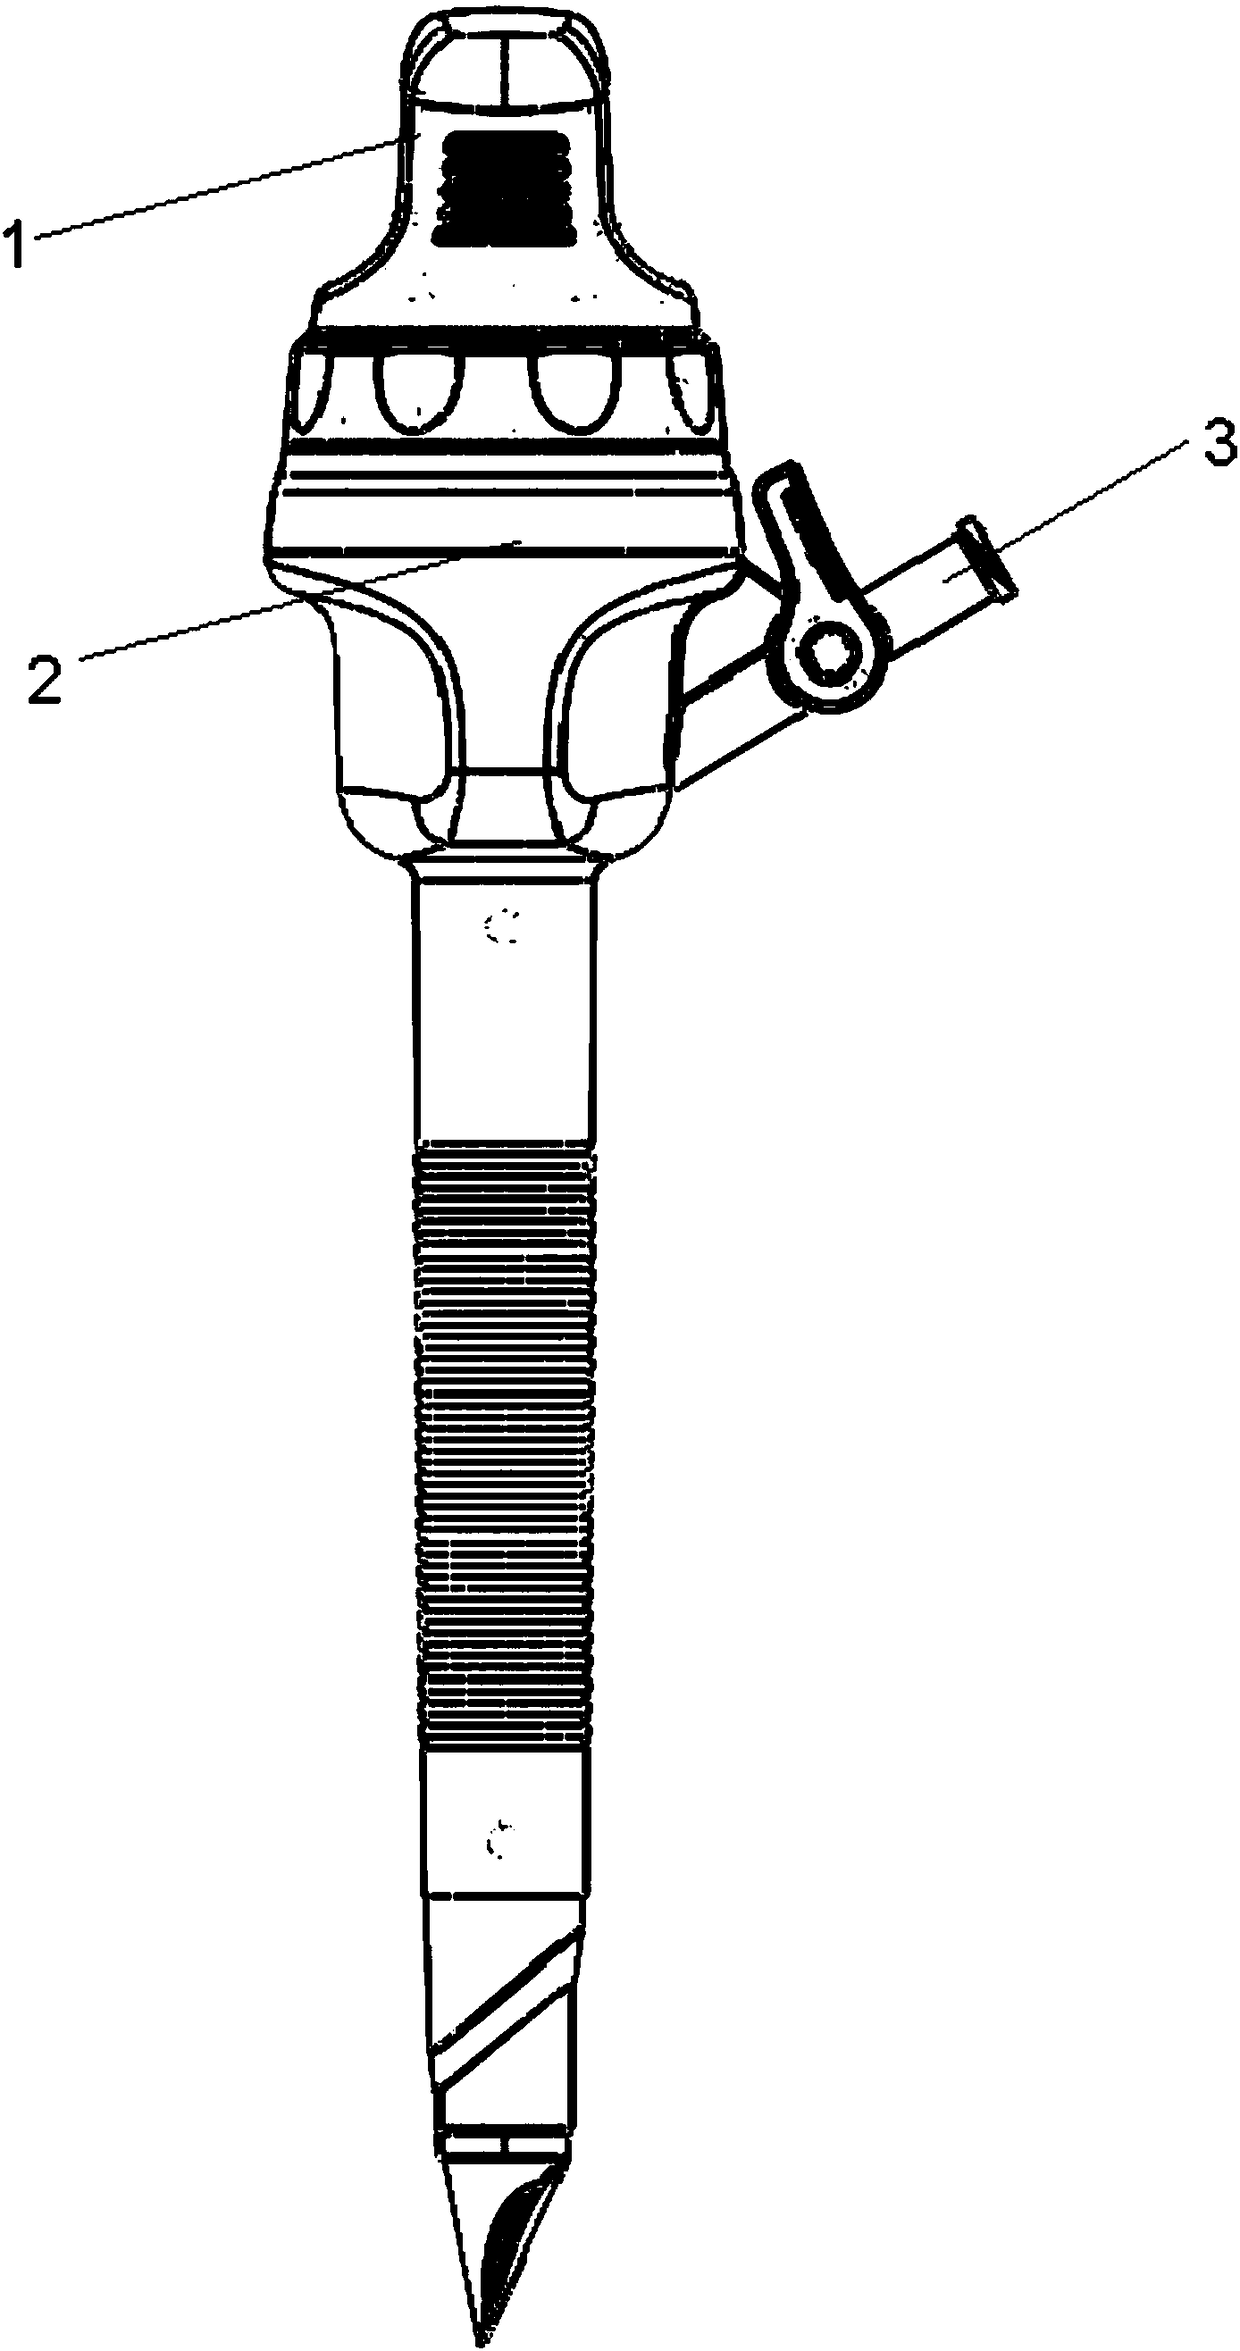 Laparoscope puncture outfit device